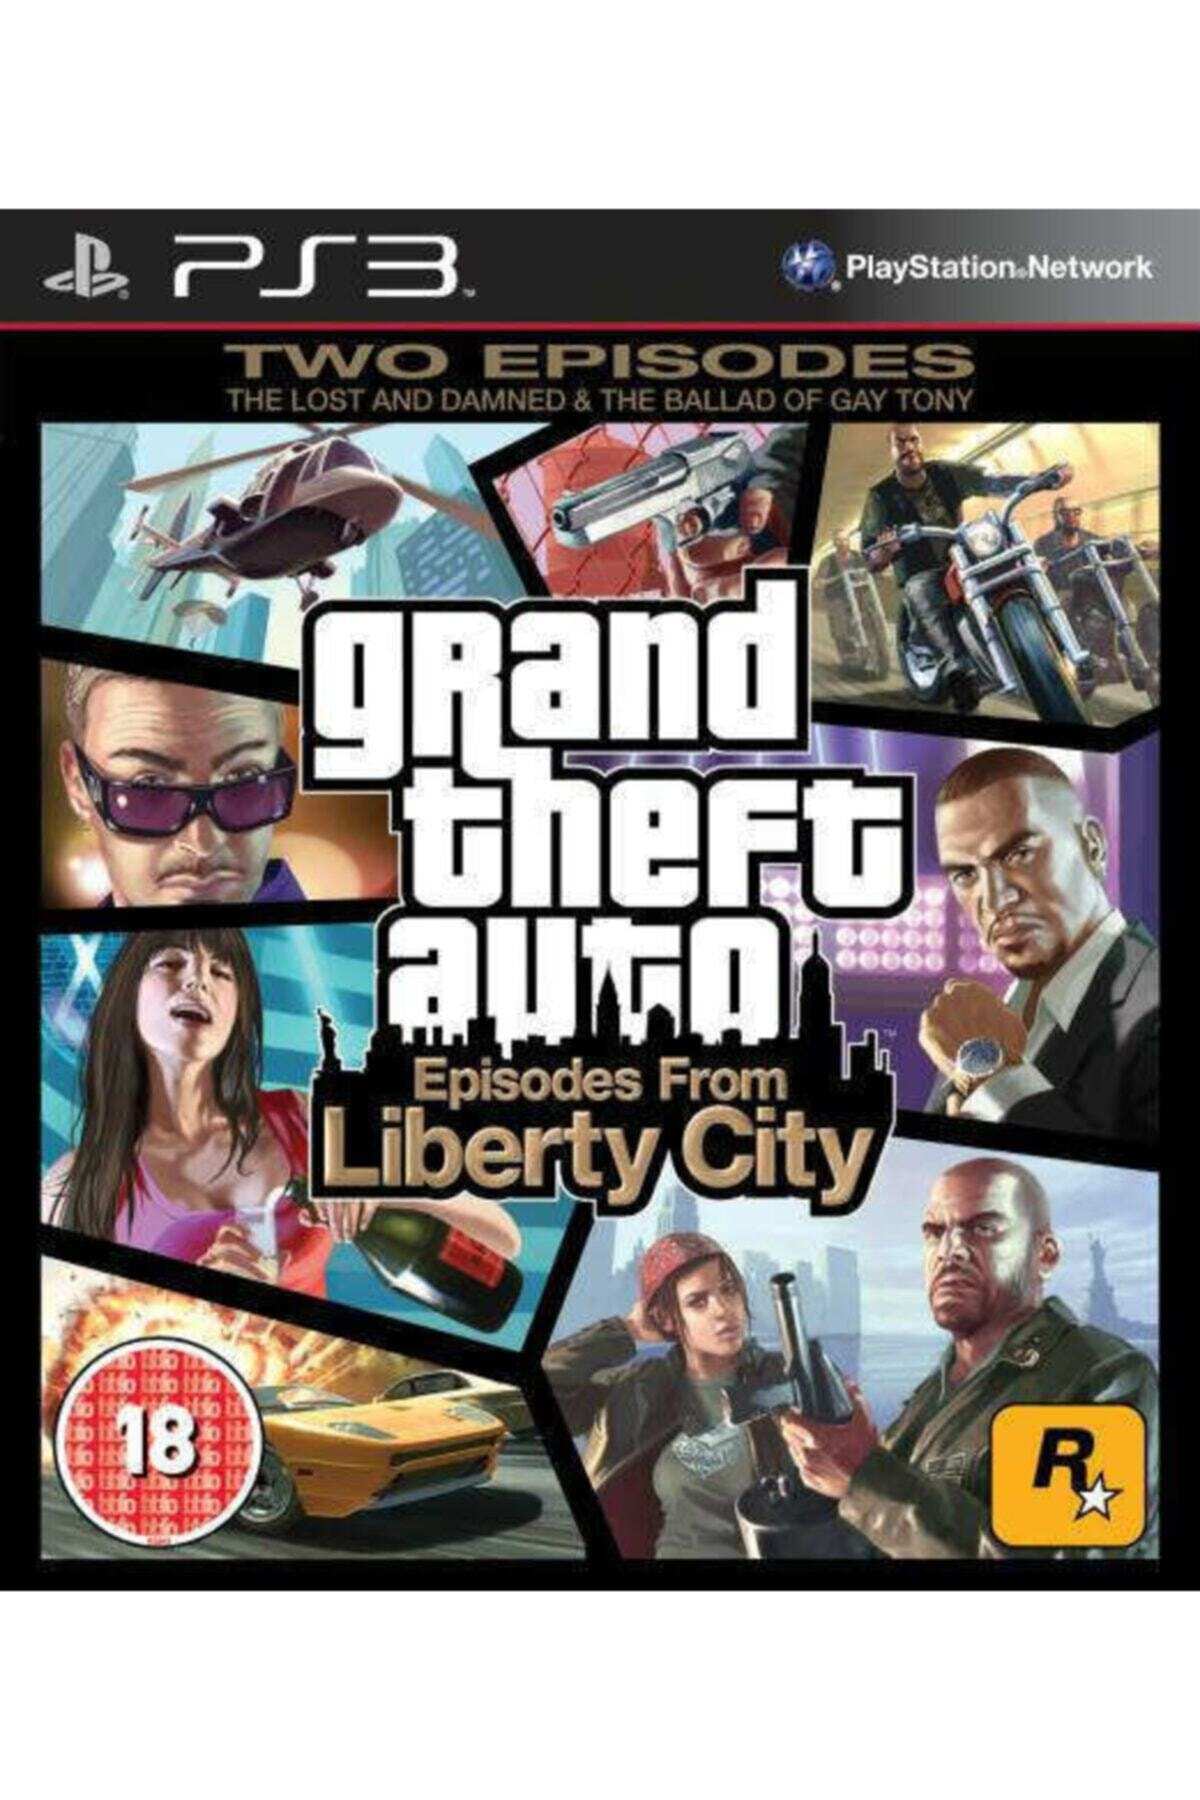 2.EL PS3 GRAND THEFT AUTO 4 EPİSODES FROM & LİBERTY CİTY COMPLE